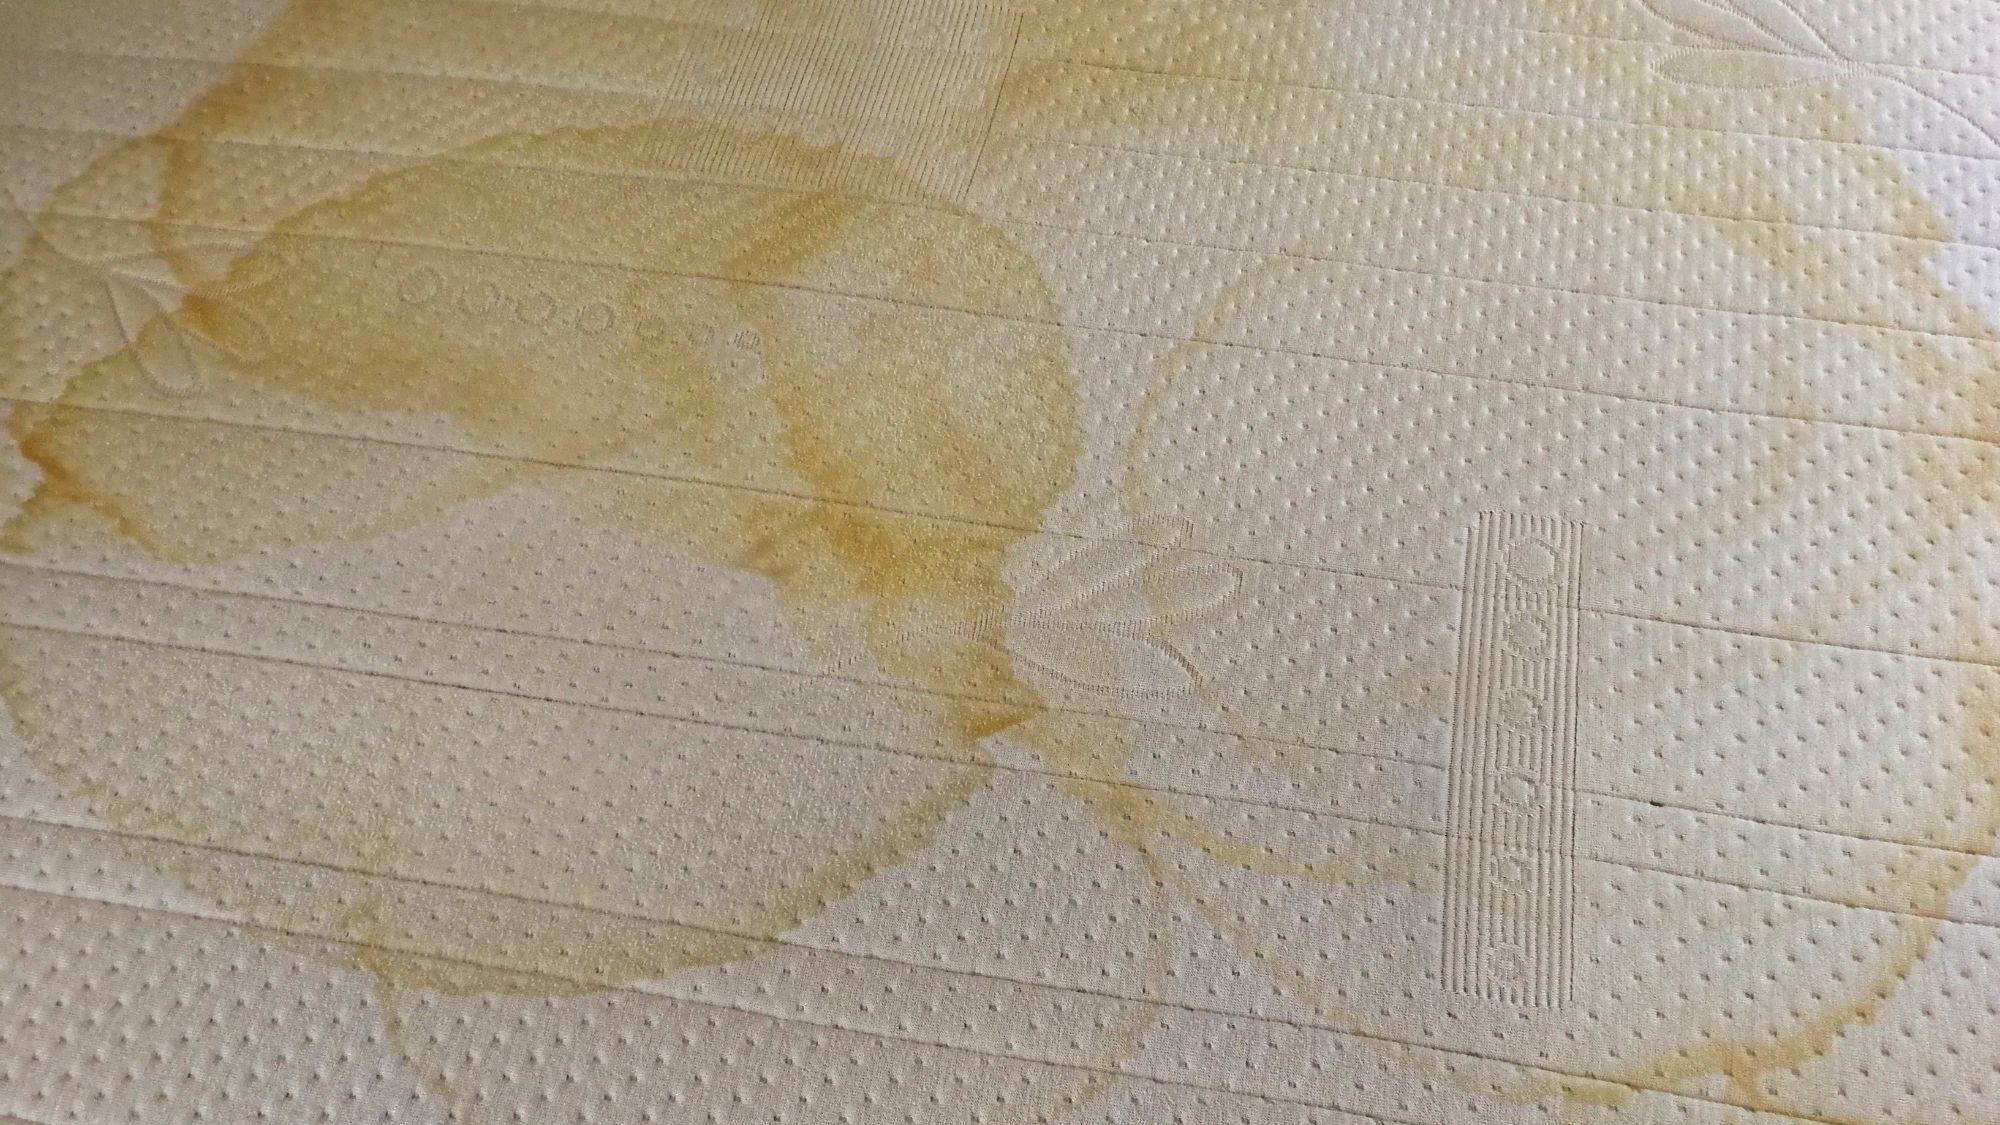 Linen sheets with stubborn stains on